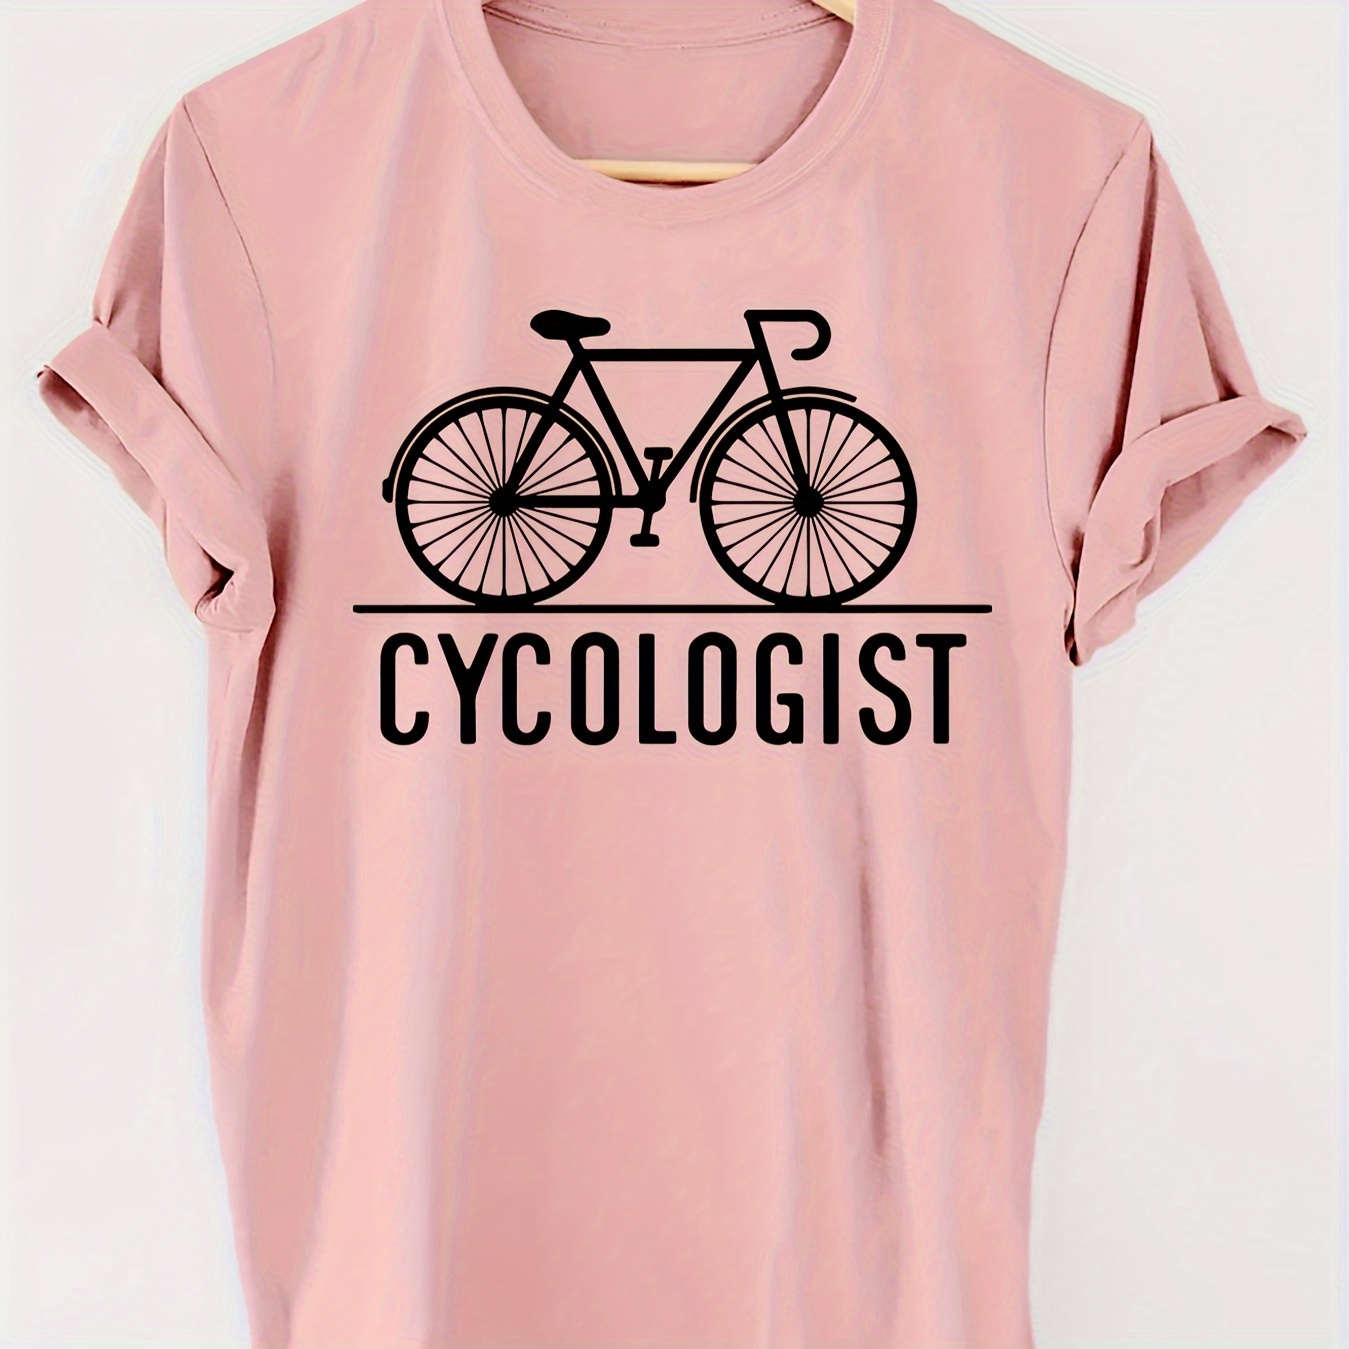 

Cycologist Letter Print T-shirt, Short Sleeve Crew Neck Casual Top For Summer & Spring, Women's Clothing